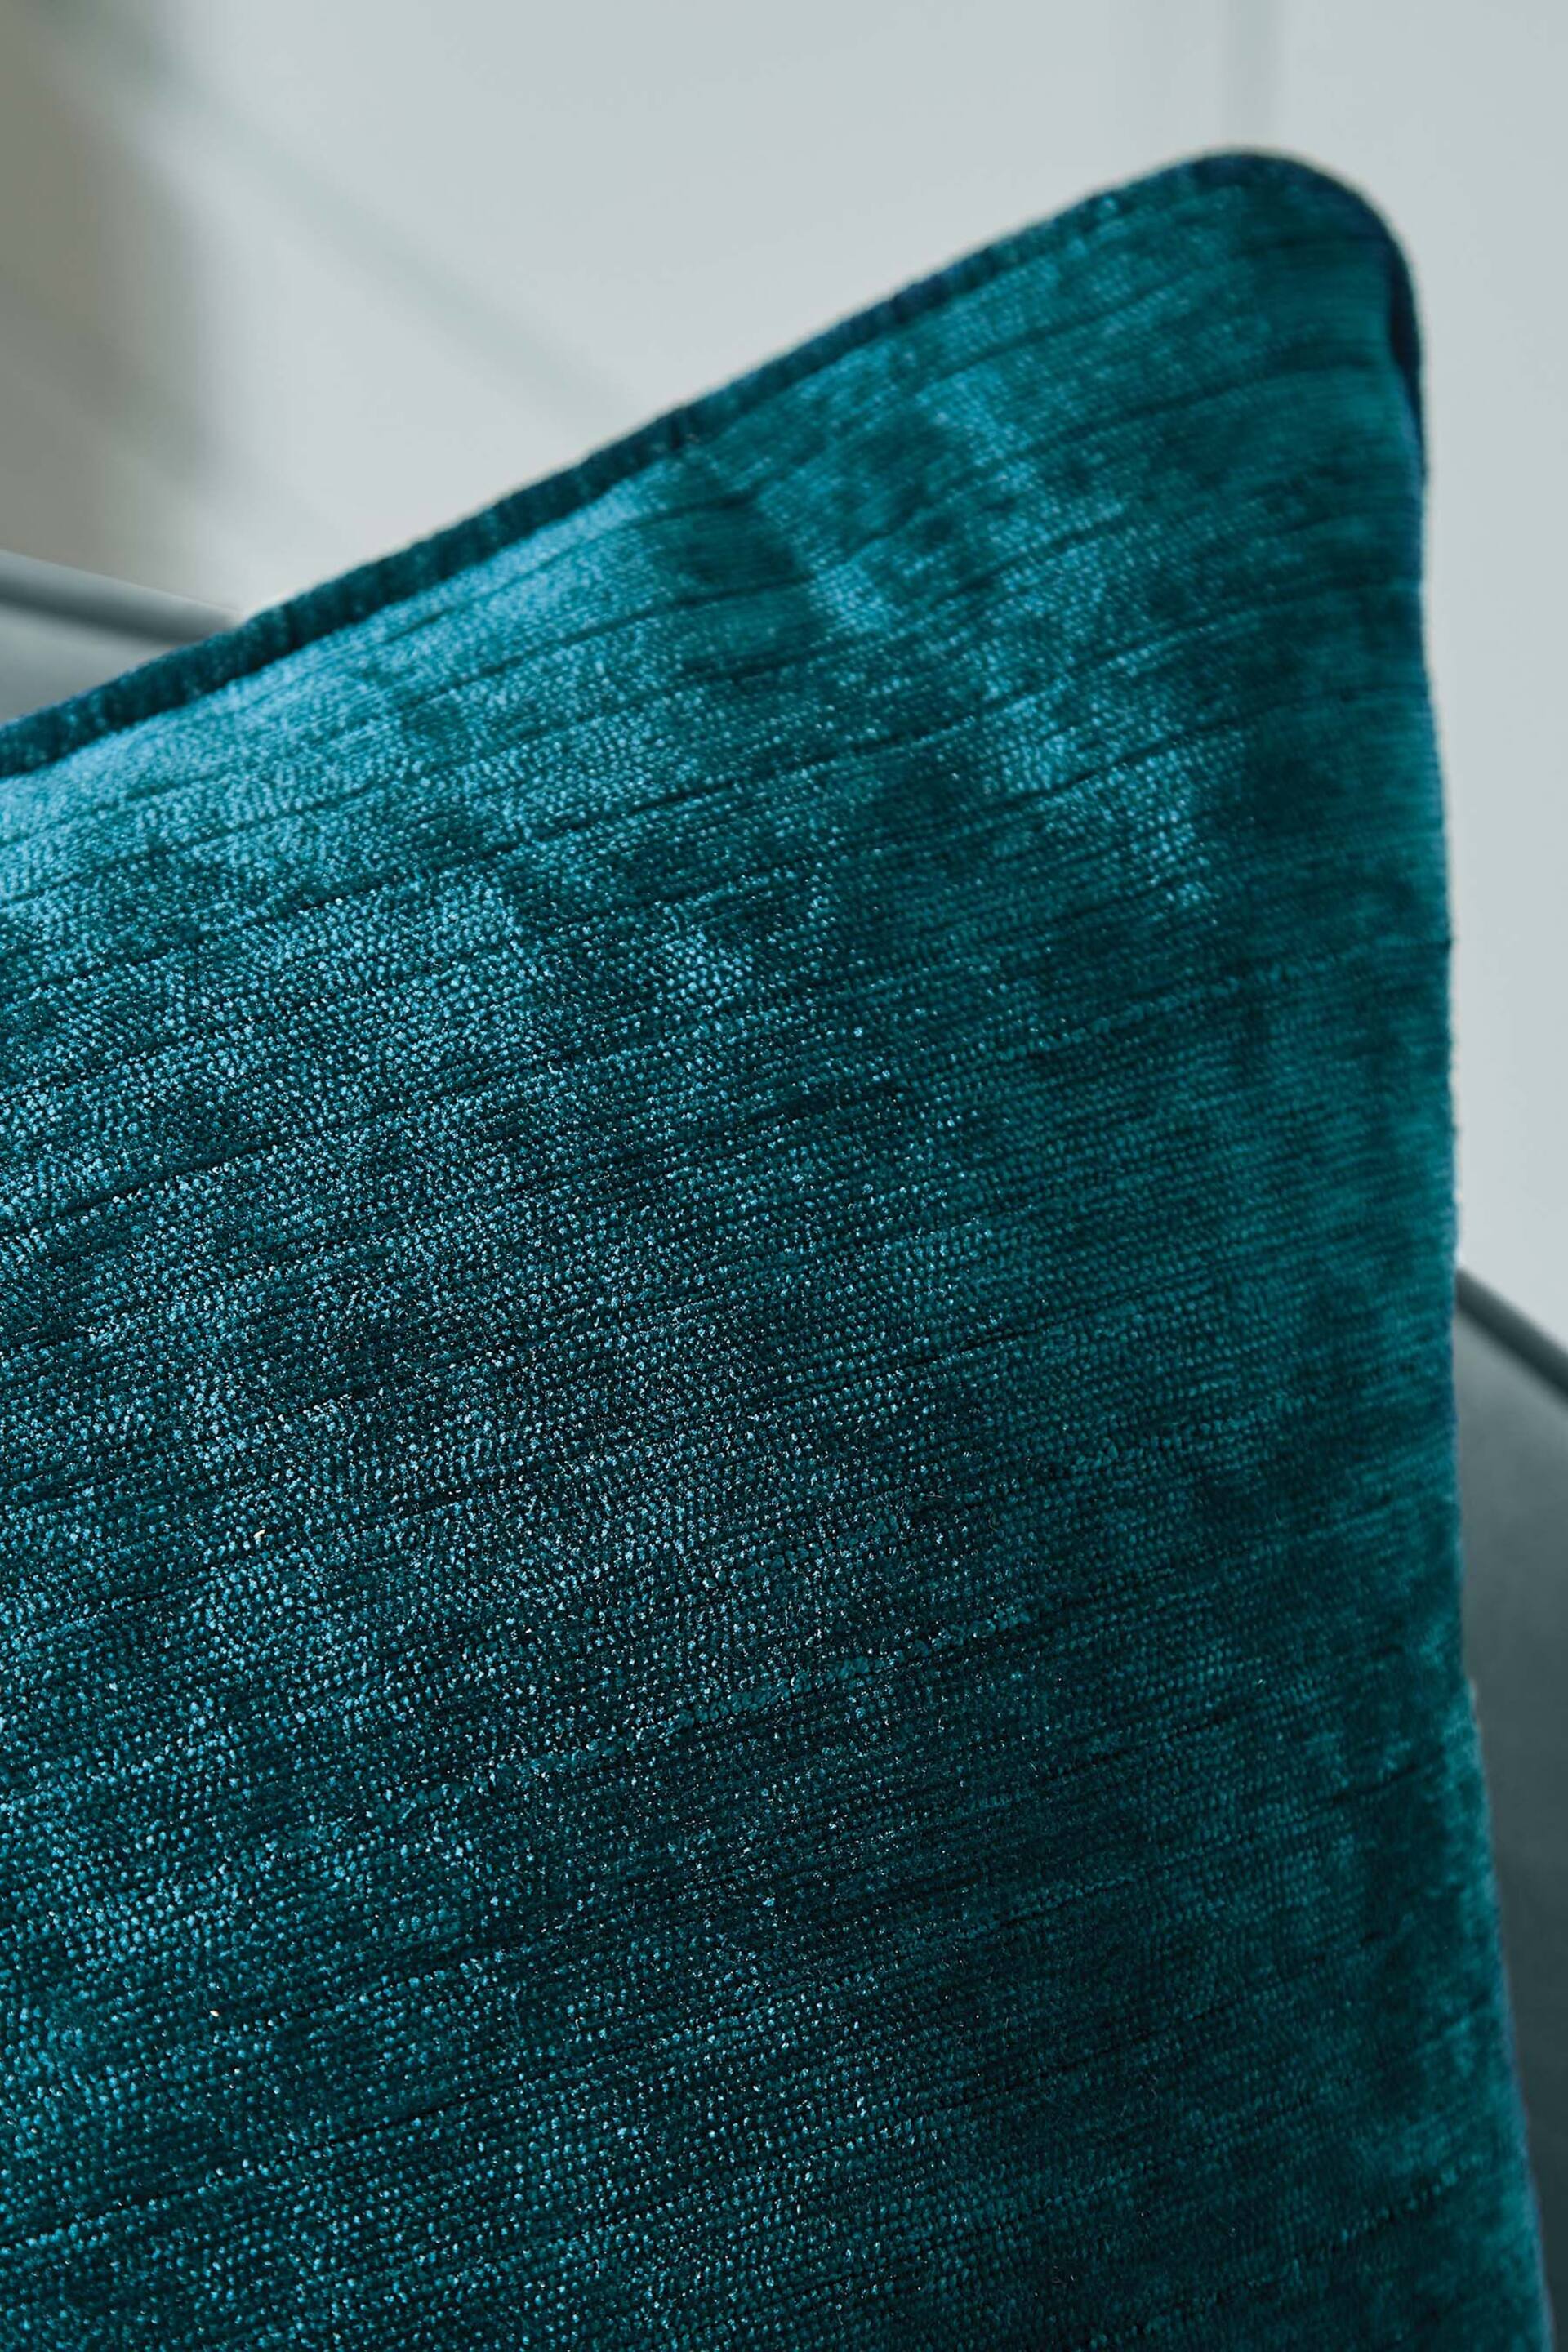 Hyperion Rich Teal Blue Selene Luxury Chenille Piped Cushion - Image 2 of 3